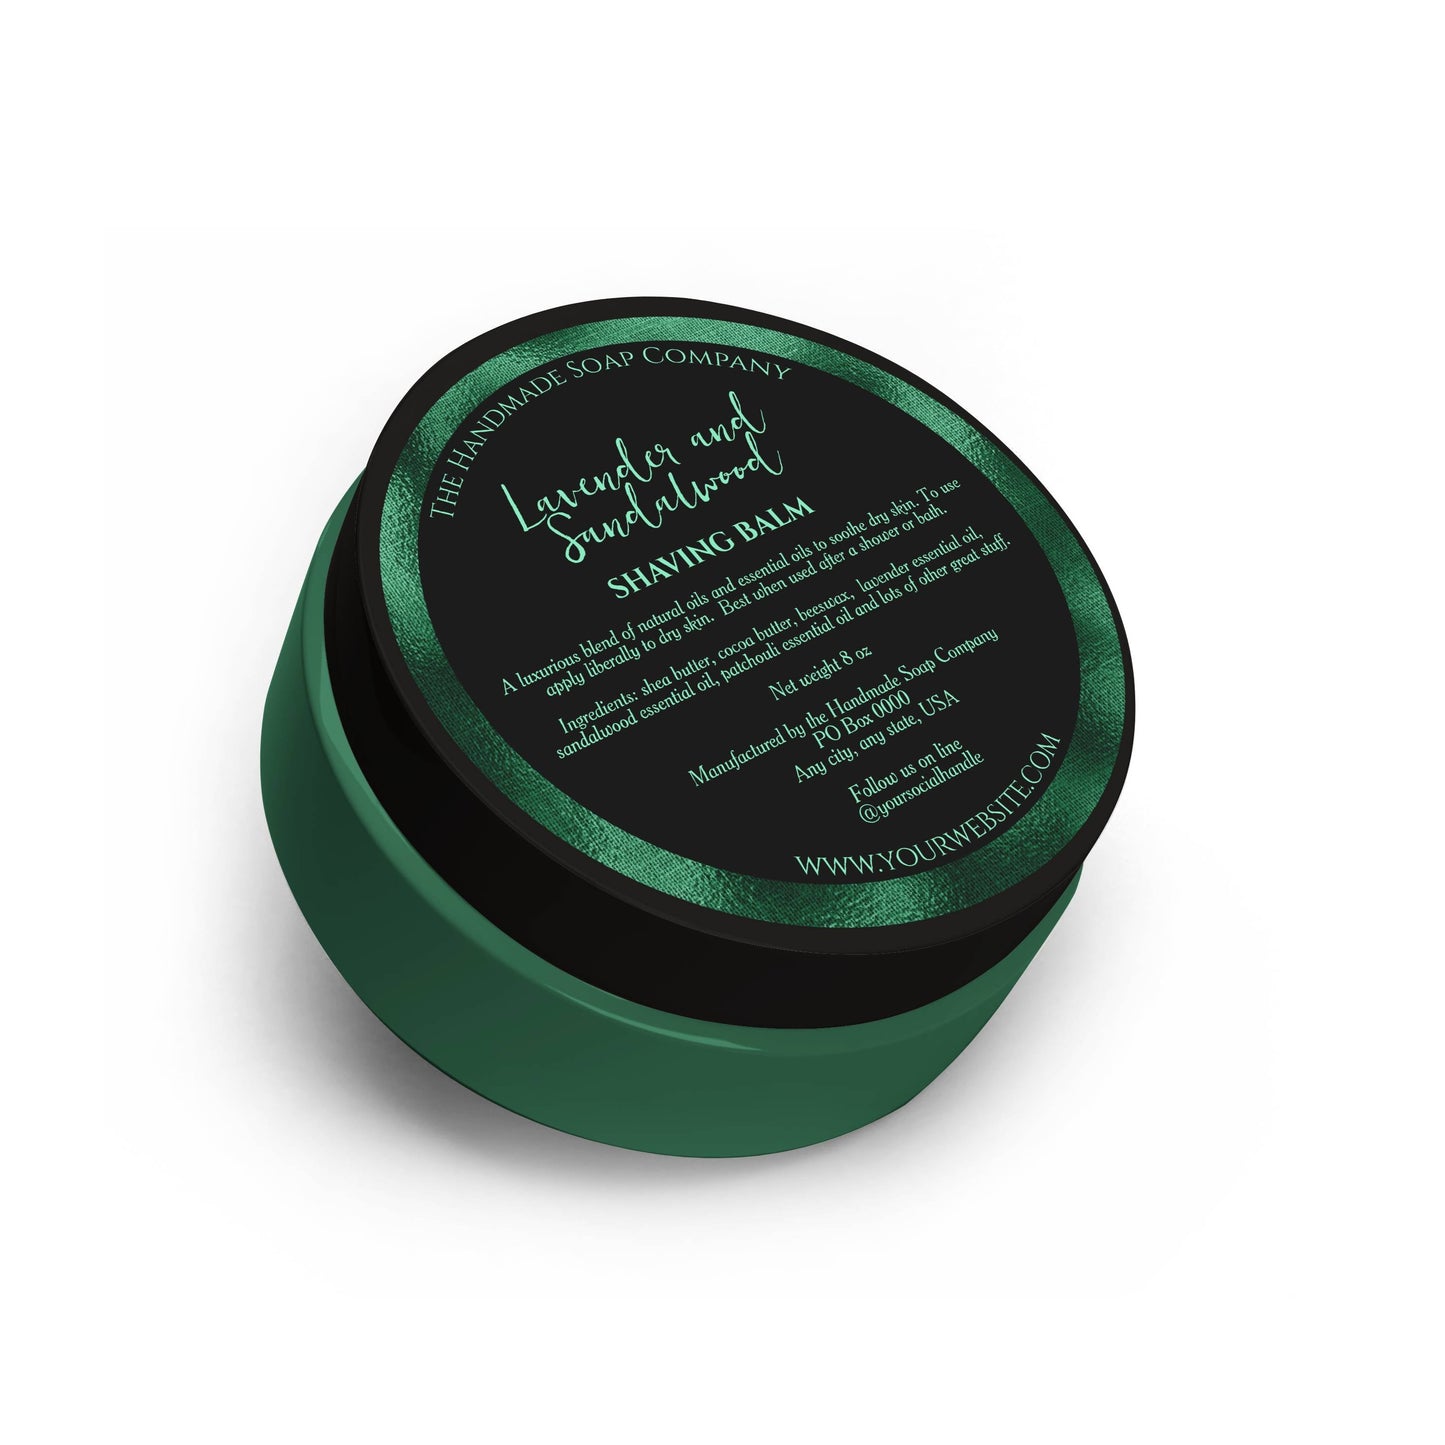 Black and Green Cosmetics Jar Label with Ingredients